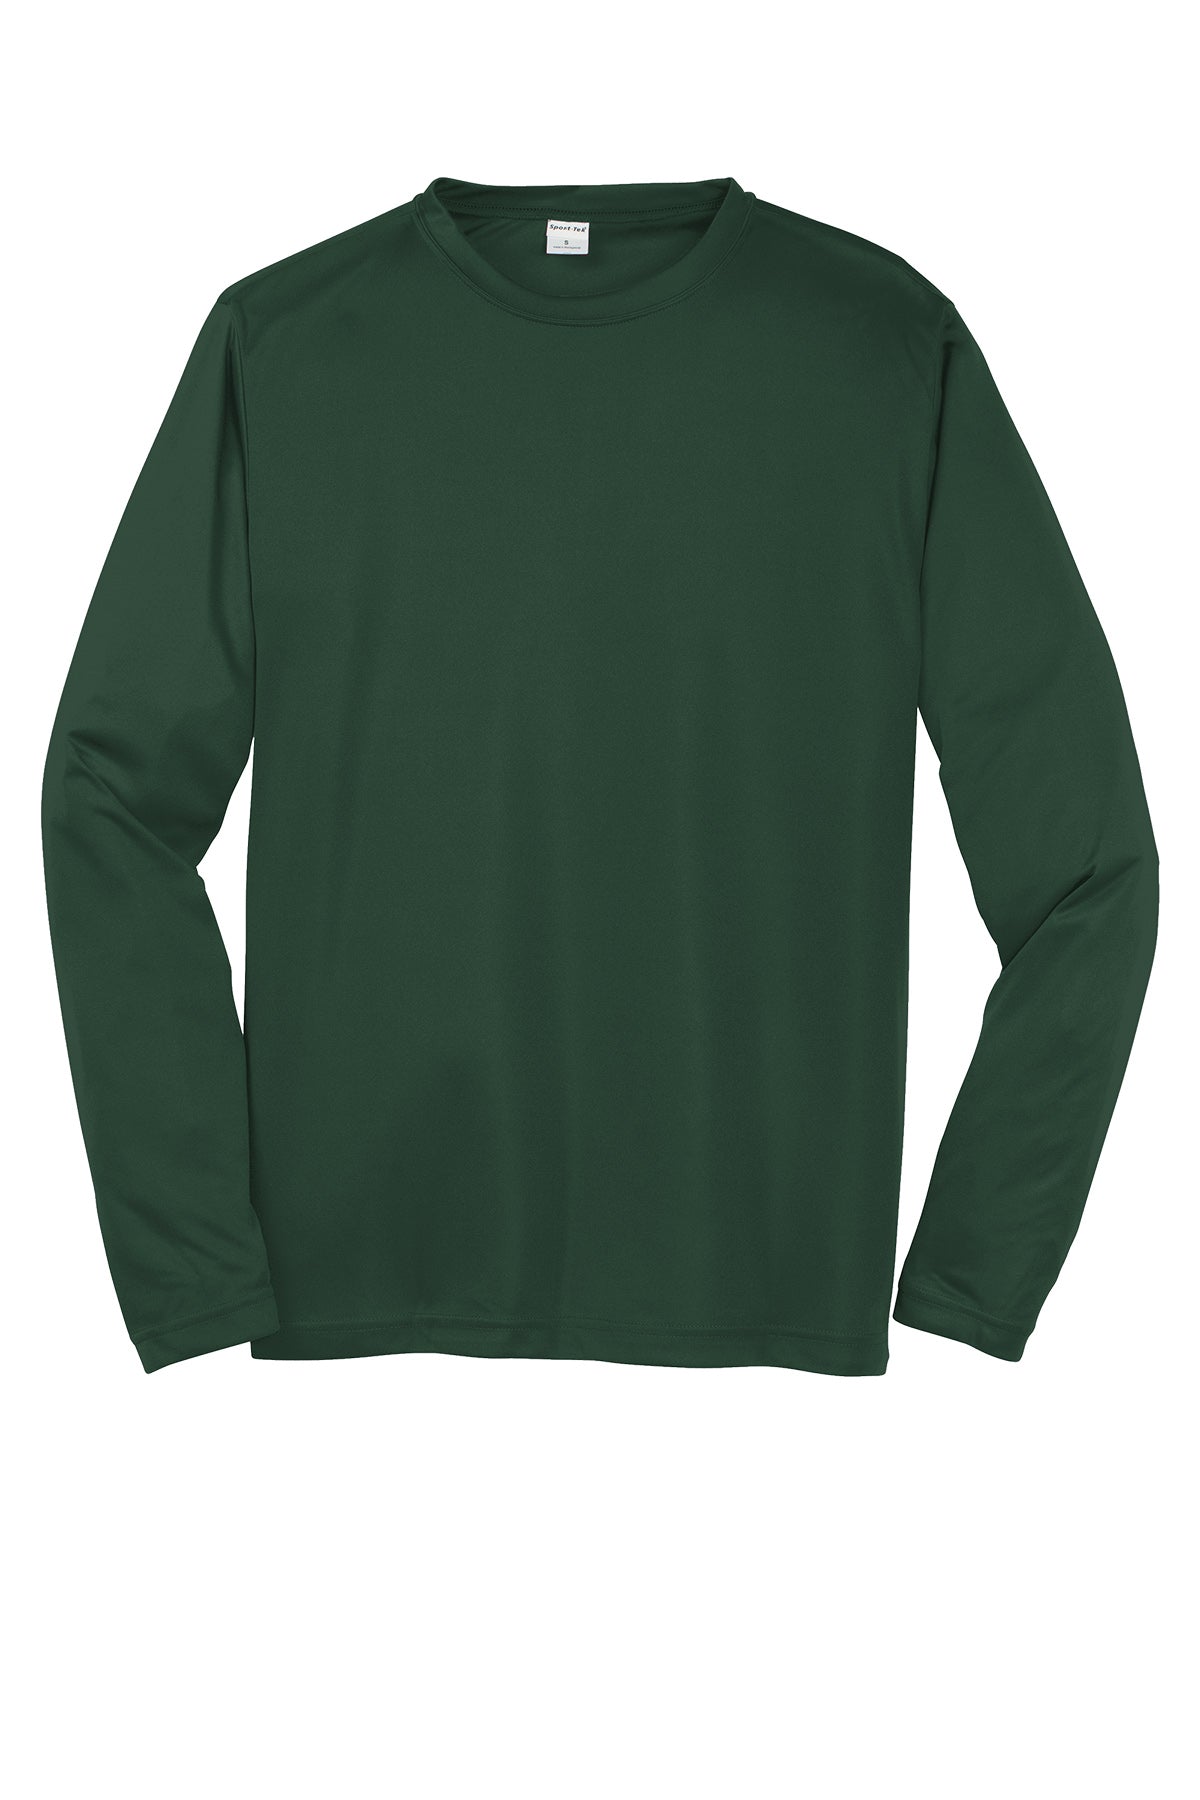 Sport-Tek St350Ls Polyester Adult Long Sleeve T-Shirt Ad Small / Forrest Green